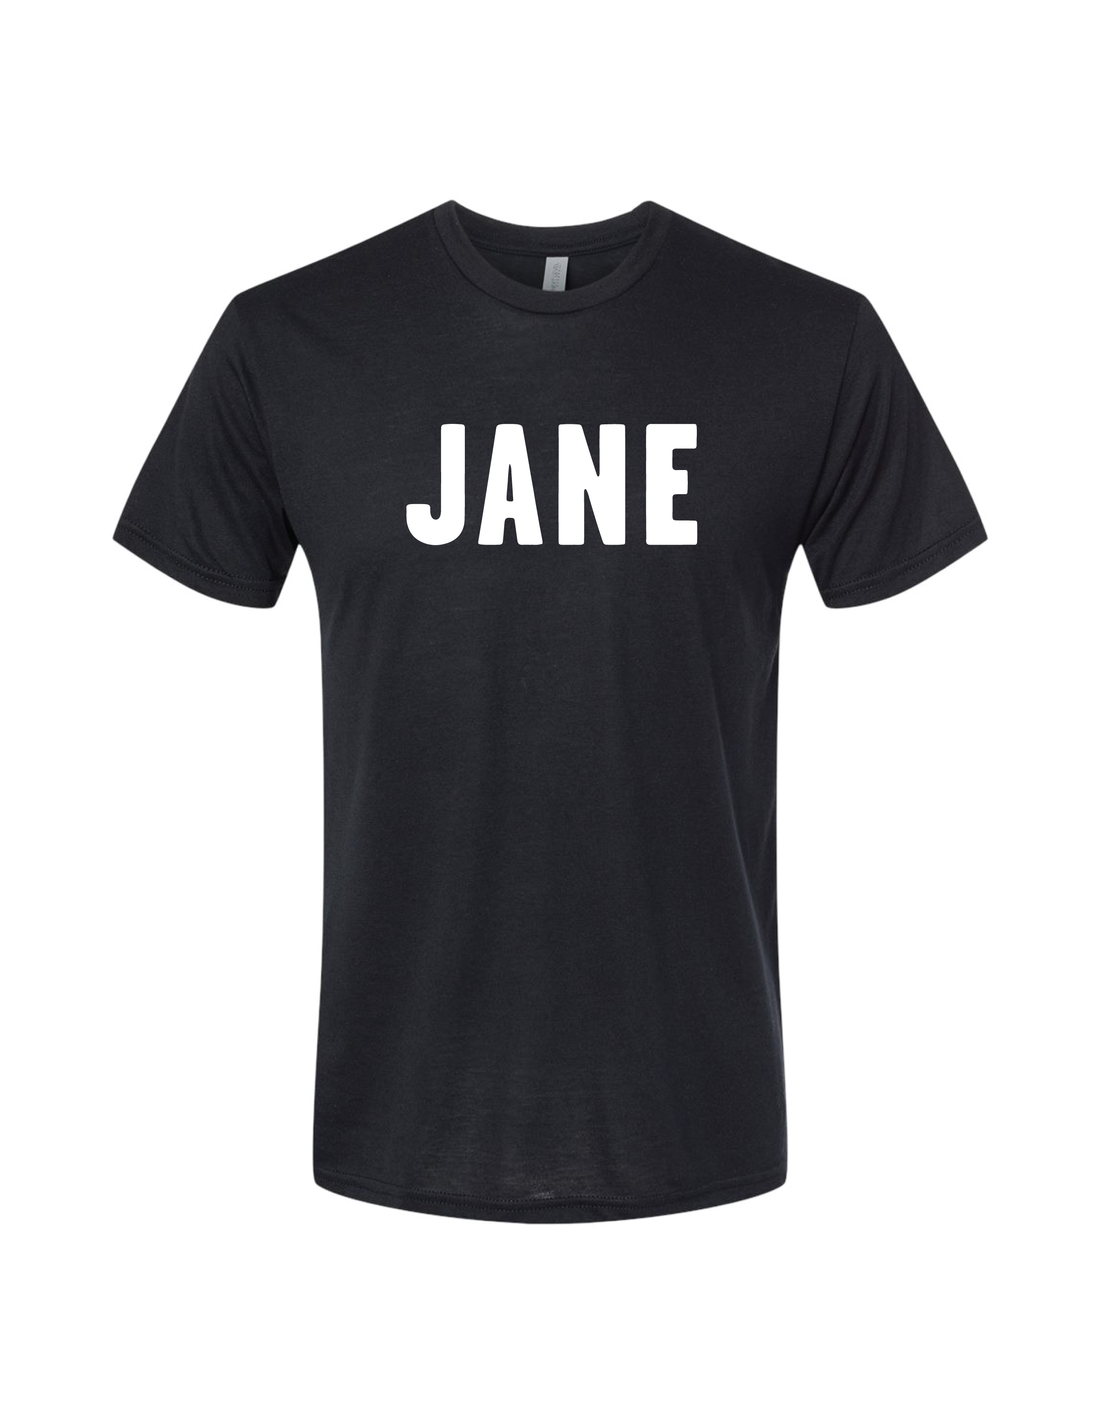 Unisex JANE Crew Neck T-Shirt in Black with White Letters